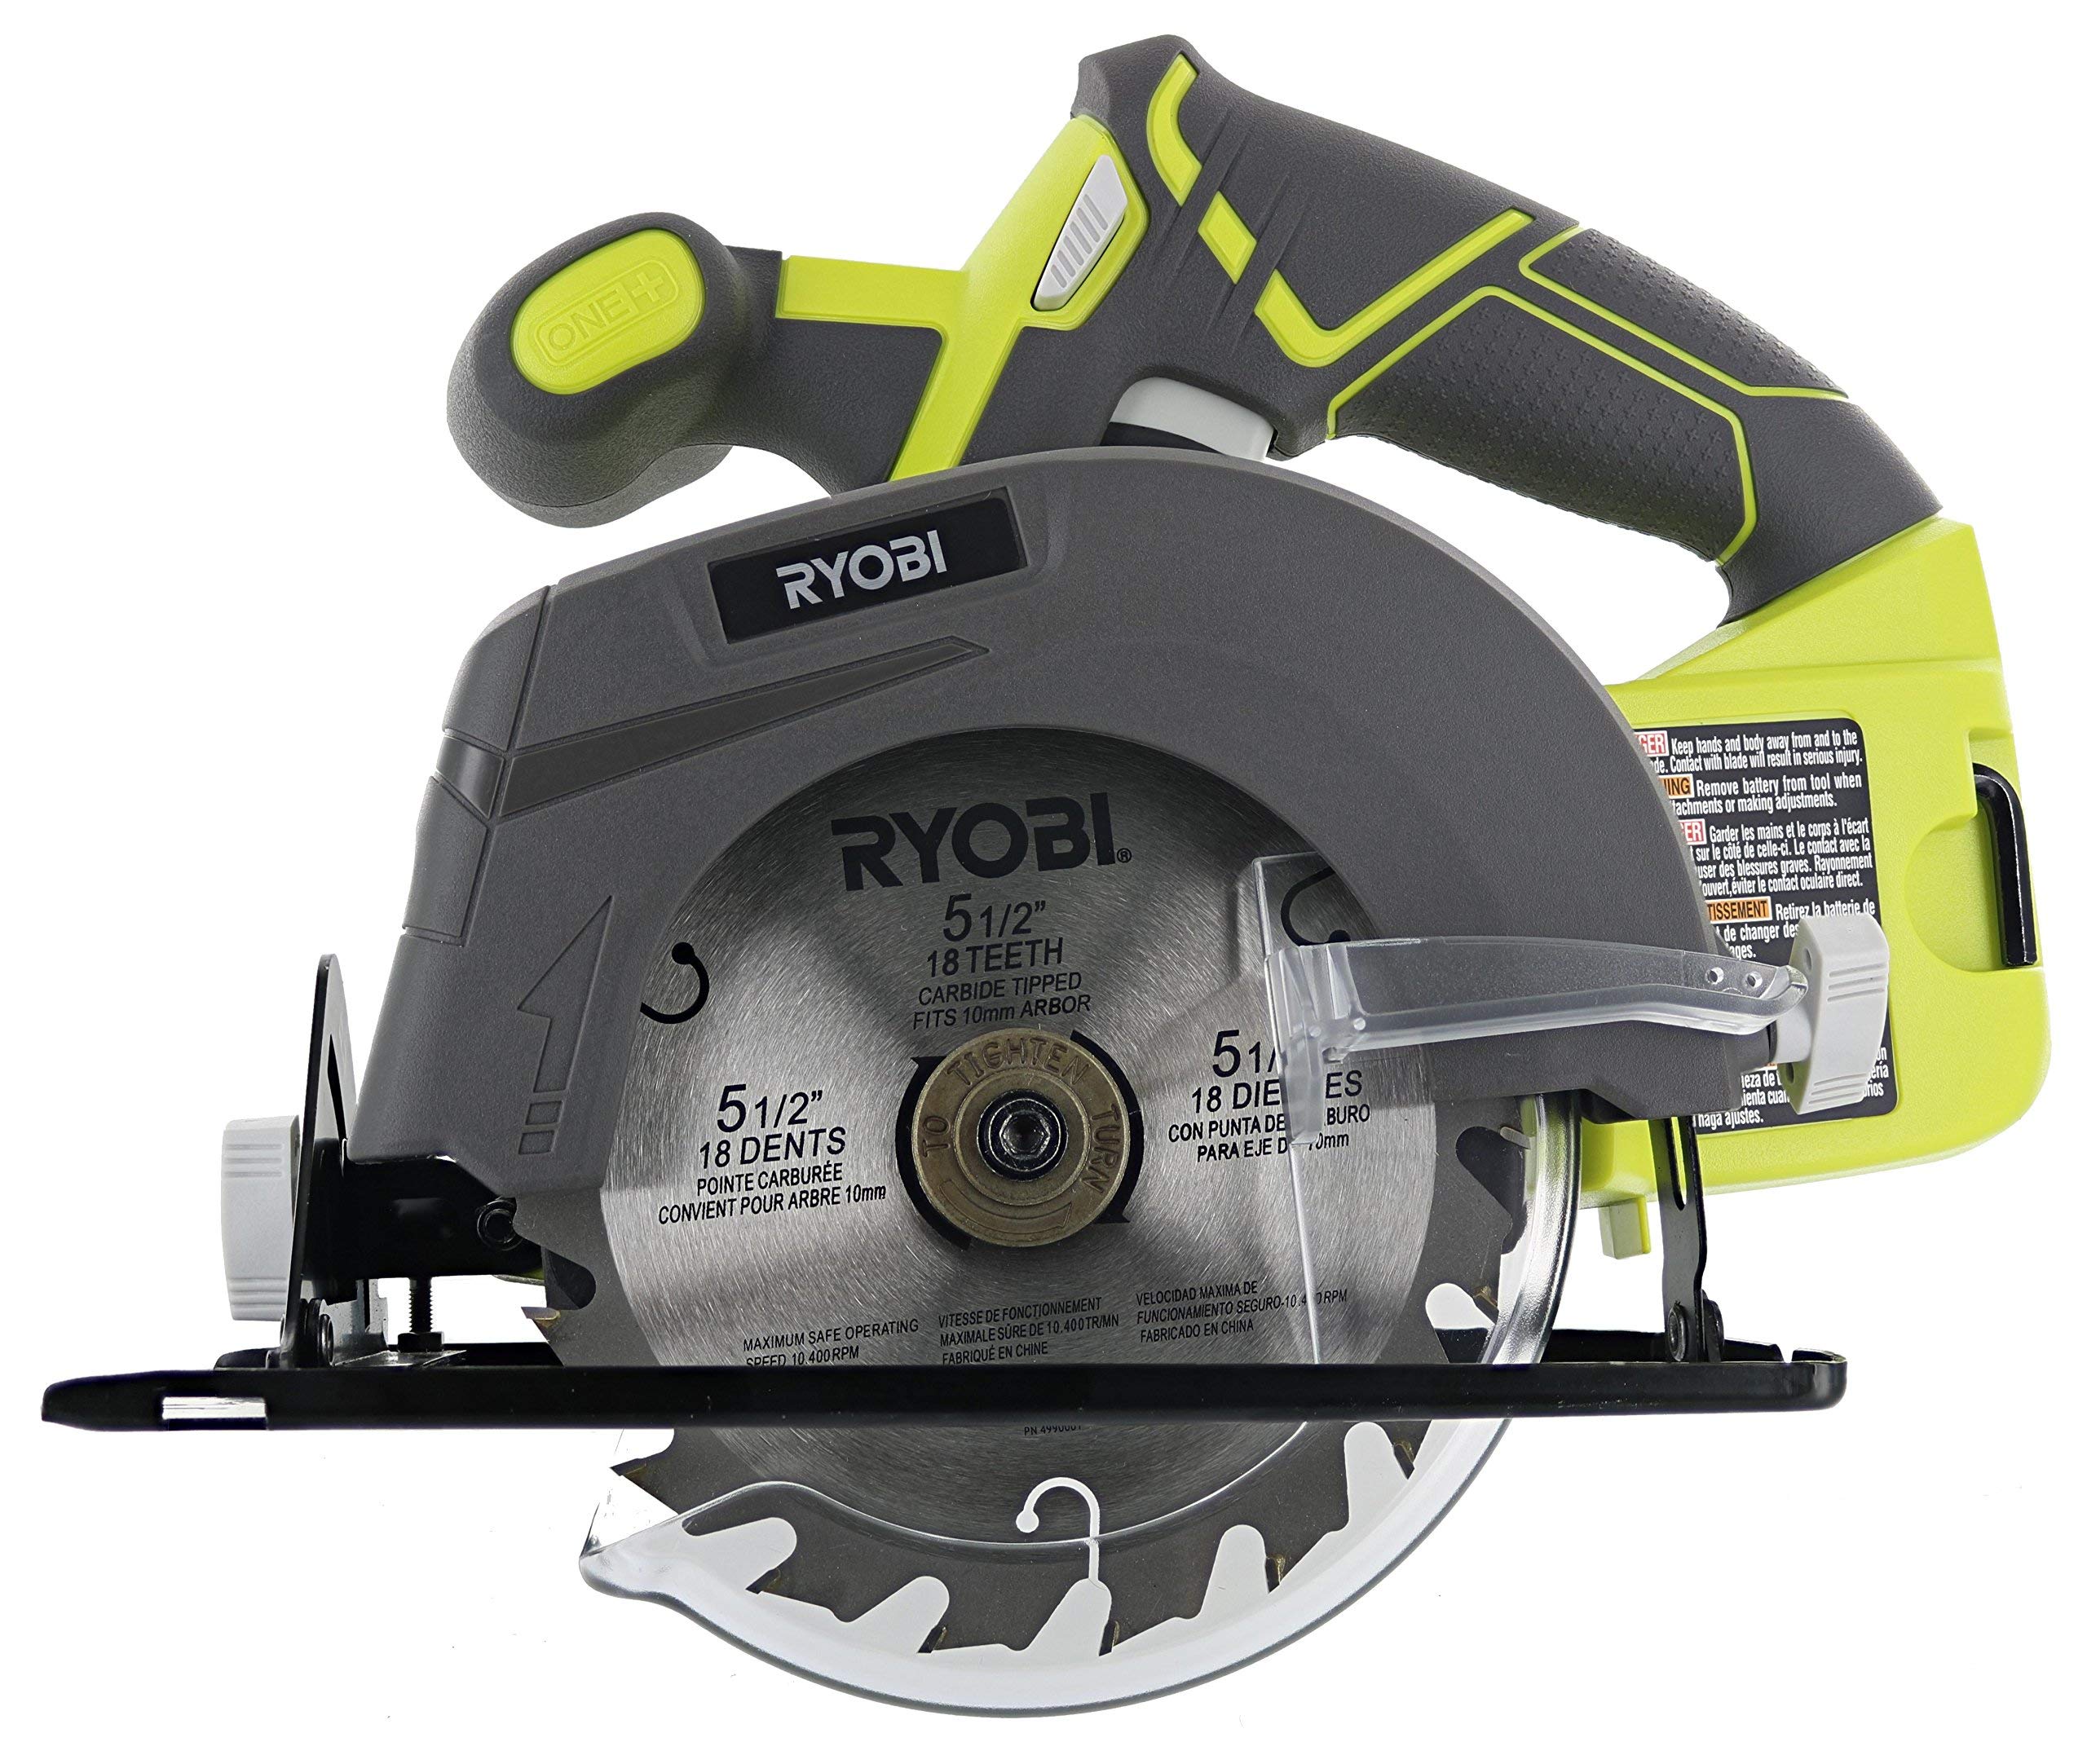 Ryobi One P505 18V Lithium Ion Cordless 5 12 4700 RPM Circular Saw Battery Not Included Power Tool Only Green並行輸